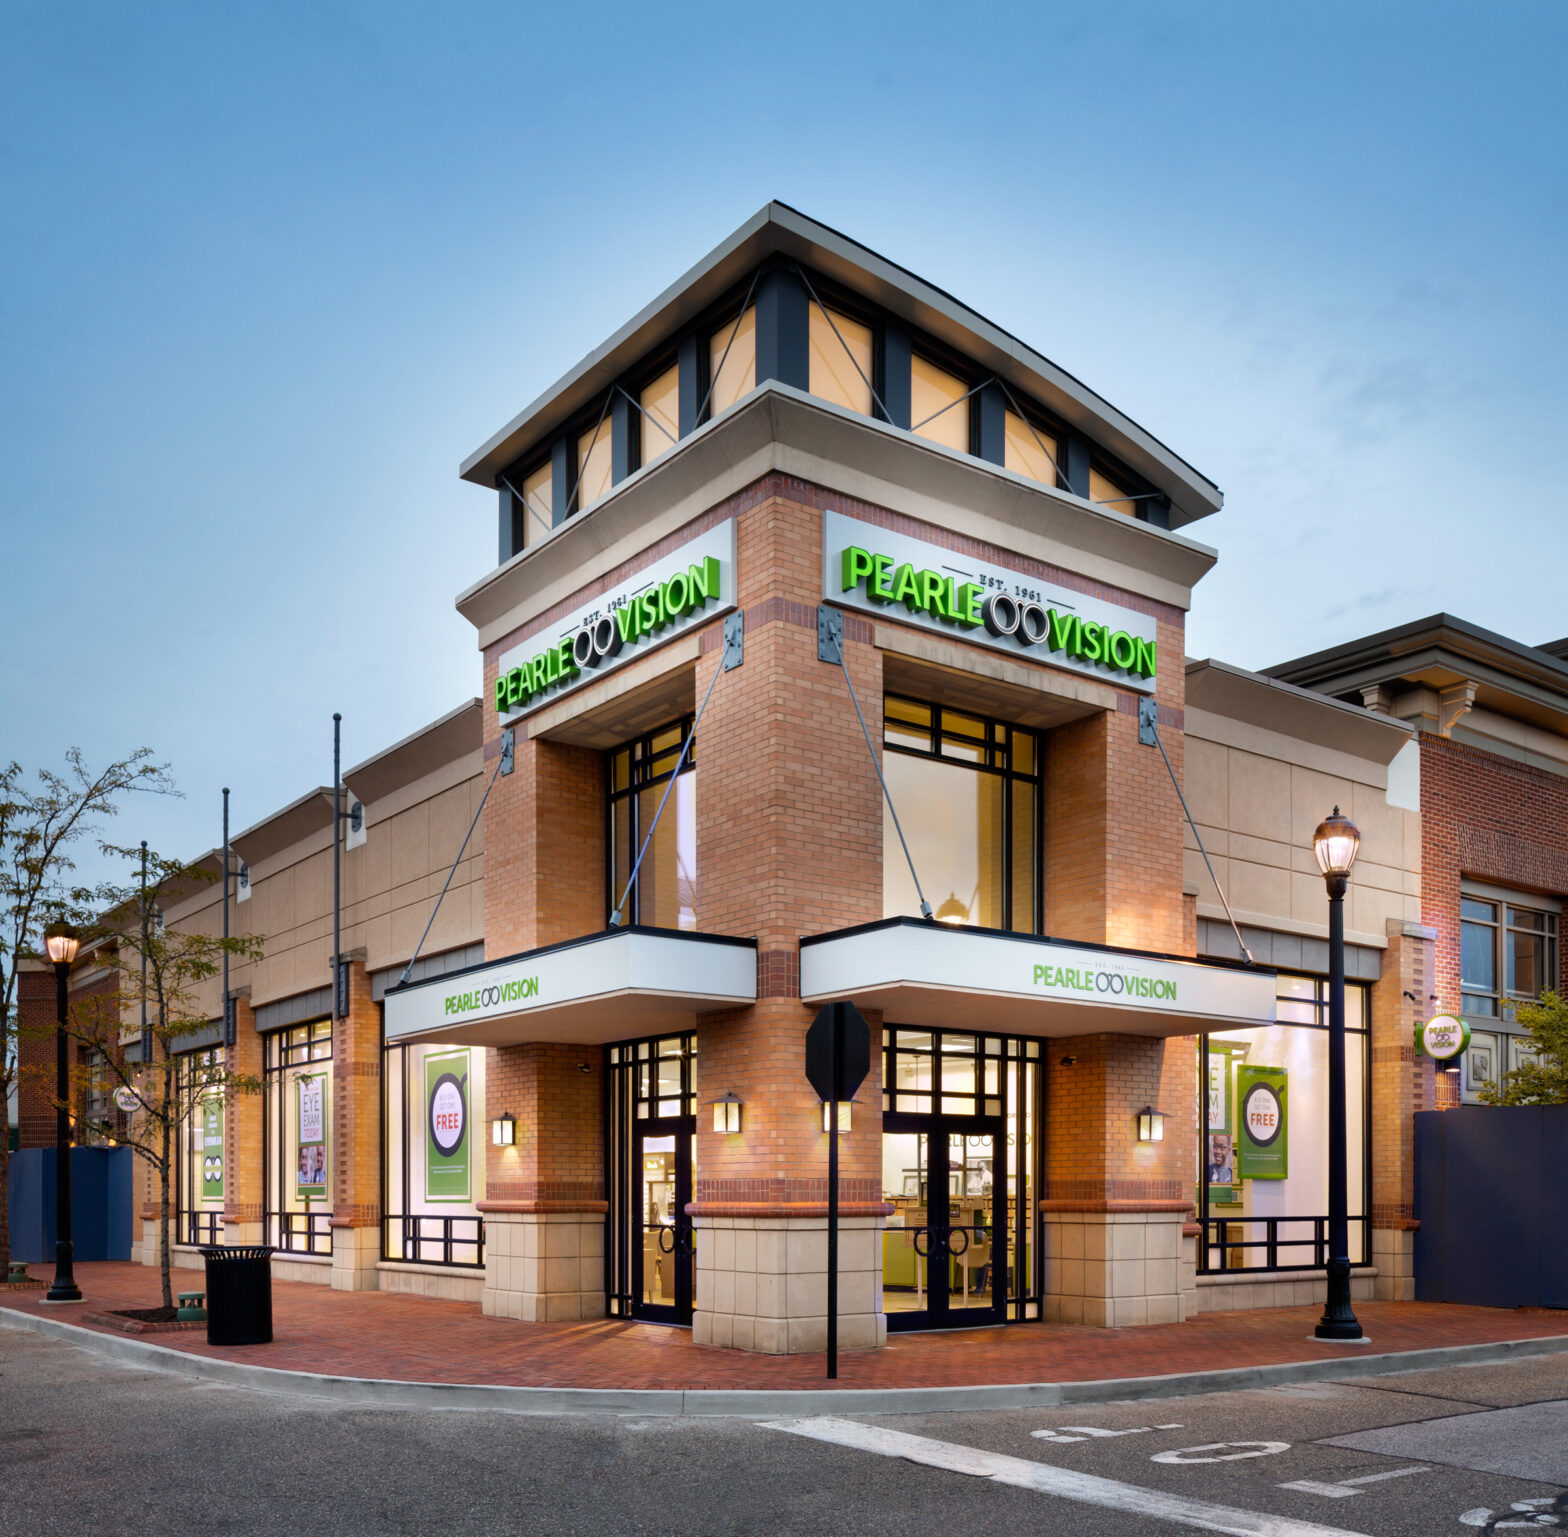 image of the exterior of a Pearle Vision on the corner of a street